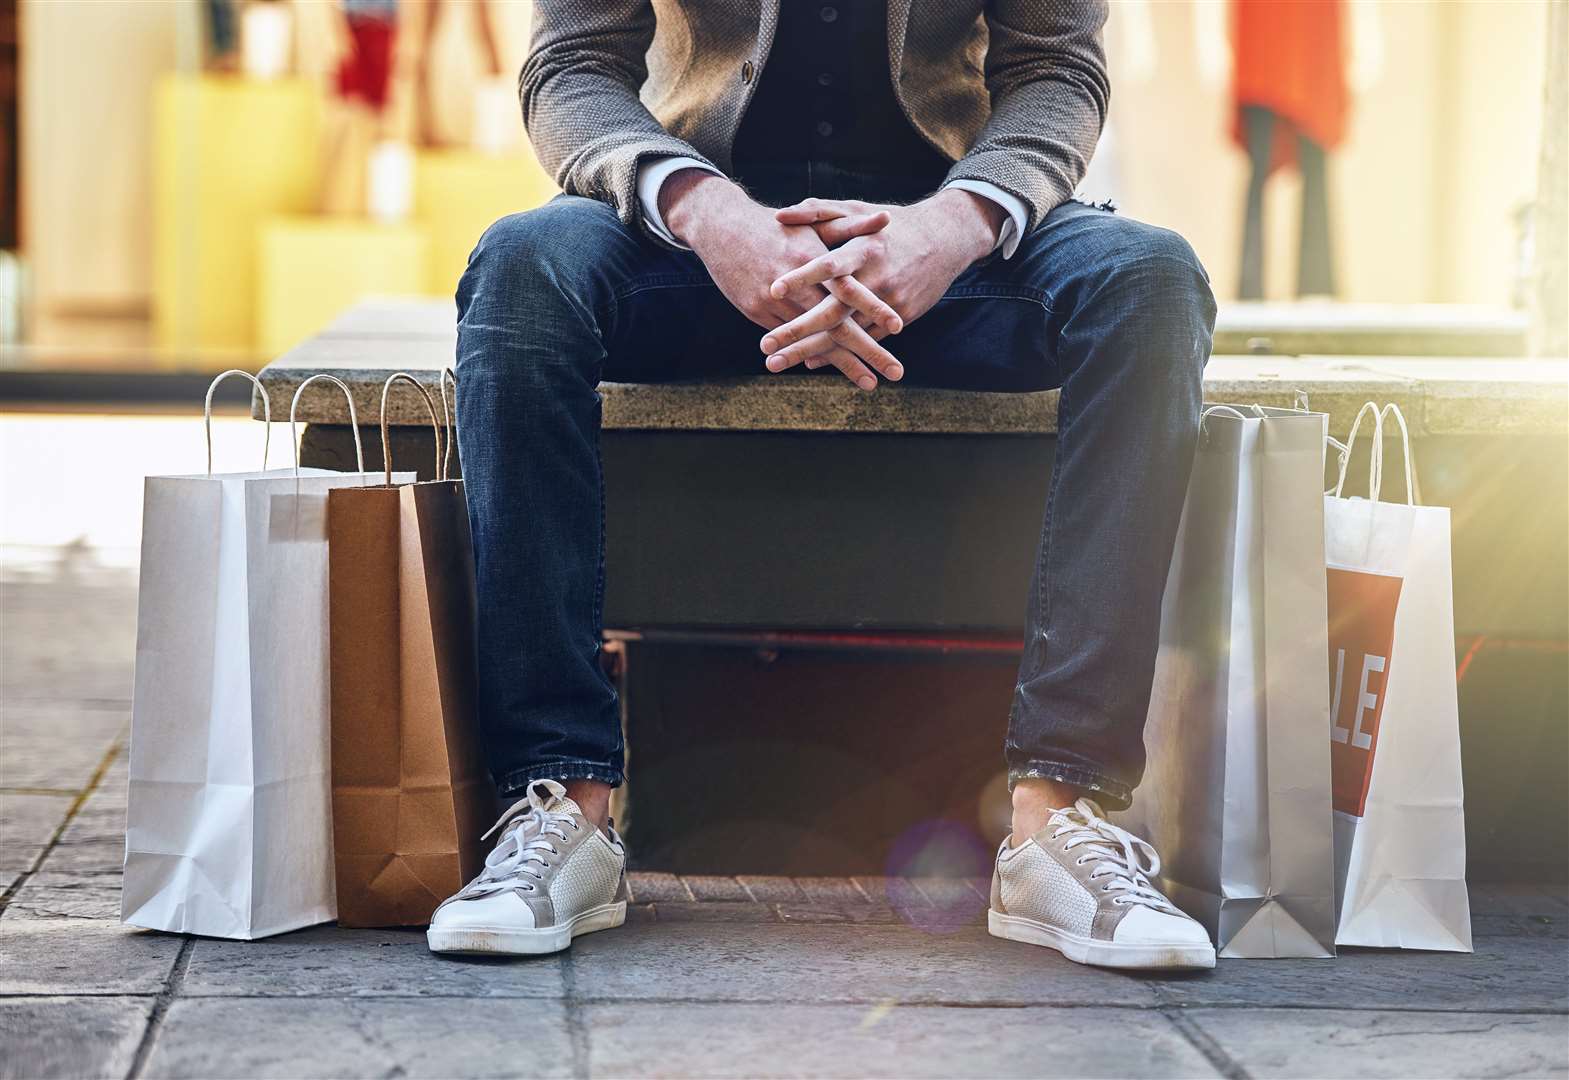 The days of lugging around shopping could soon be over. Picture: iStock